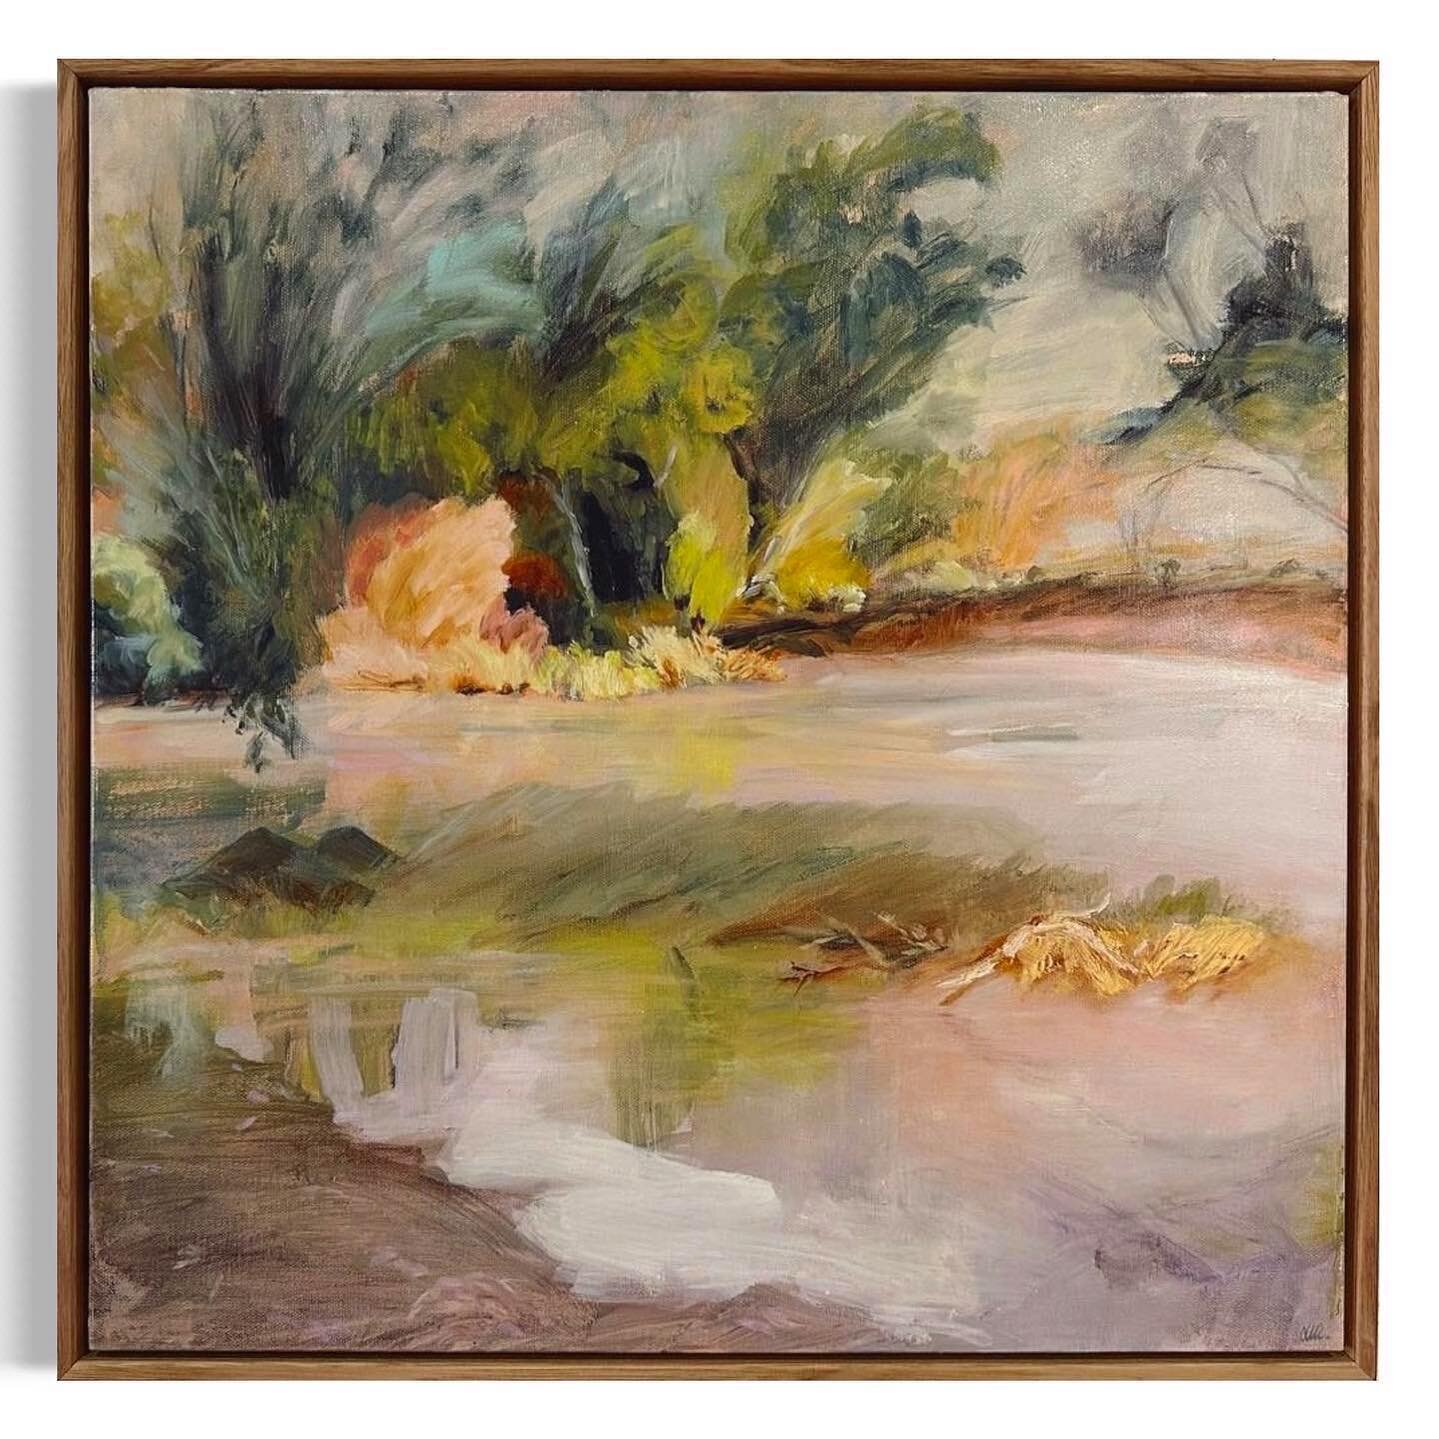 🙏🌿🙏
Posted @withregram &bull; @satchandcogallery &lsquo;The Echoes Bend&rsquo; 53x53cm framed oil by @melindagiblett_art

Please DM or 0407343528 for enquiries.
&bull;
&bull;
&bull;
#australianartist #australianart #art #landscapepainting #contemp